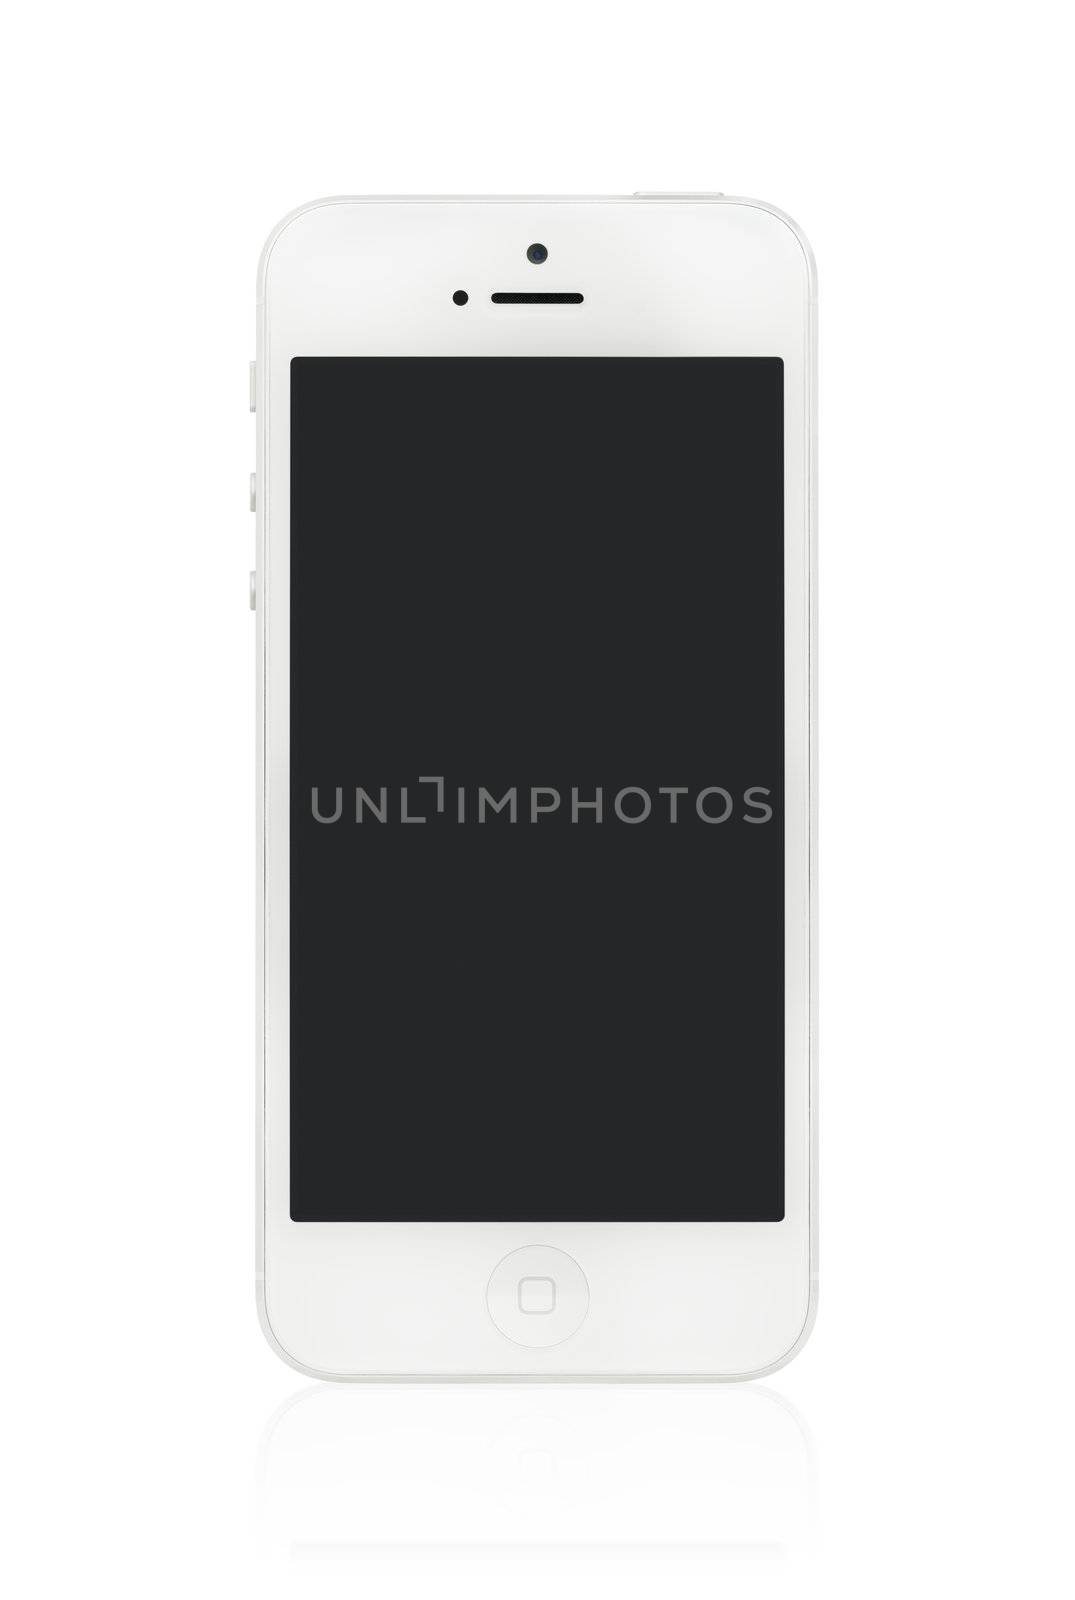 White Apple iPhone 5 with blank screen by bloomua